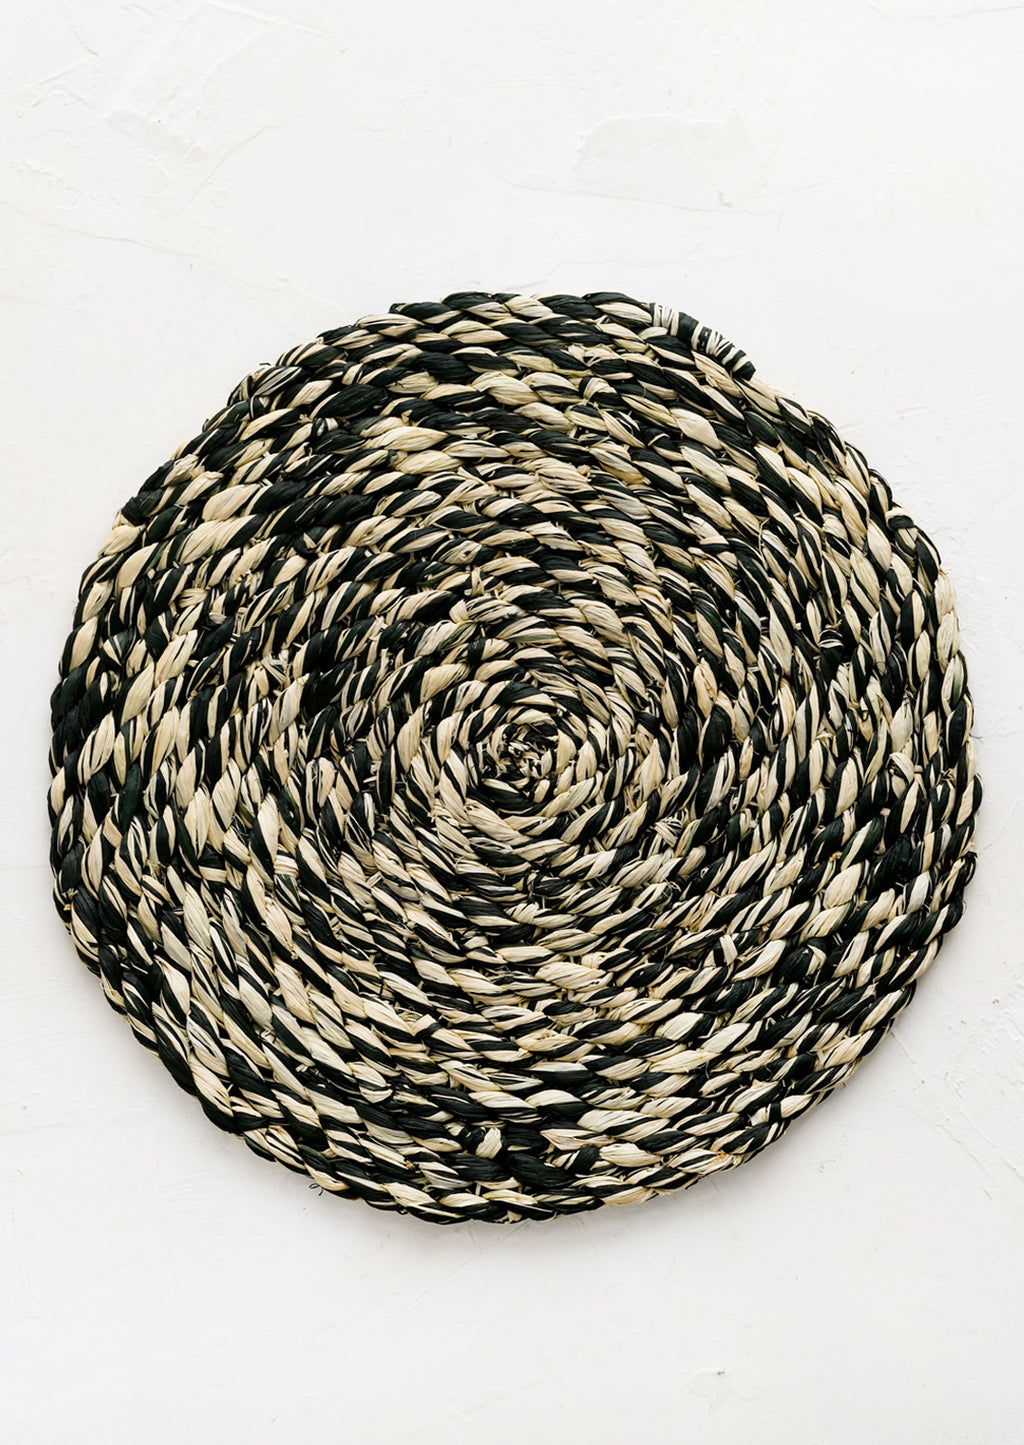 Deep Forest: A round woven raffia placemat in natural and dark forest green.